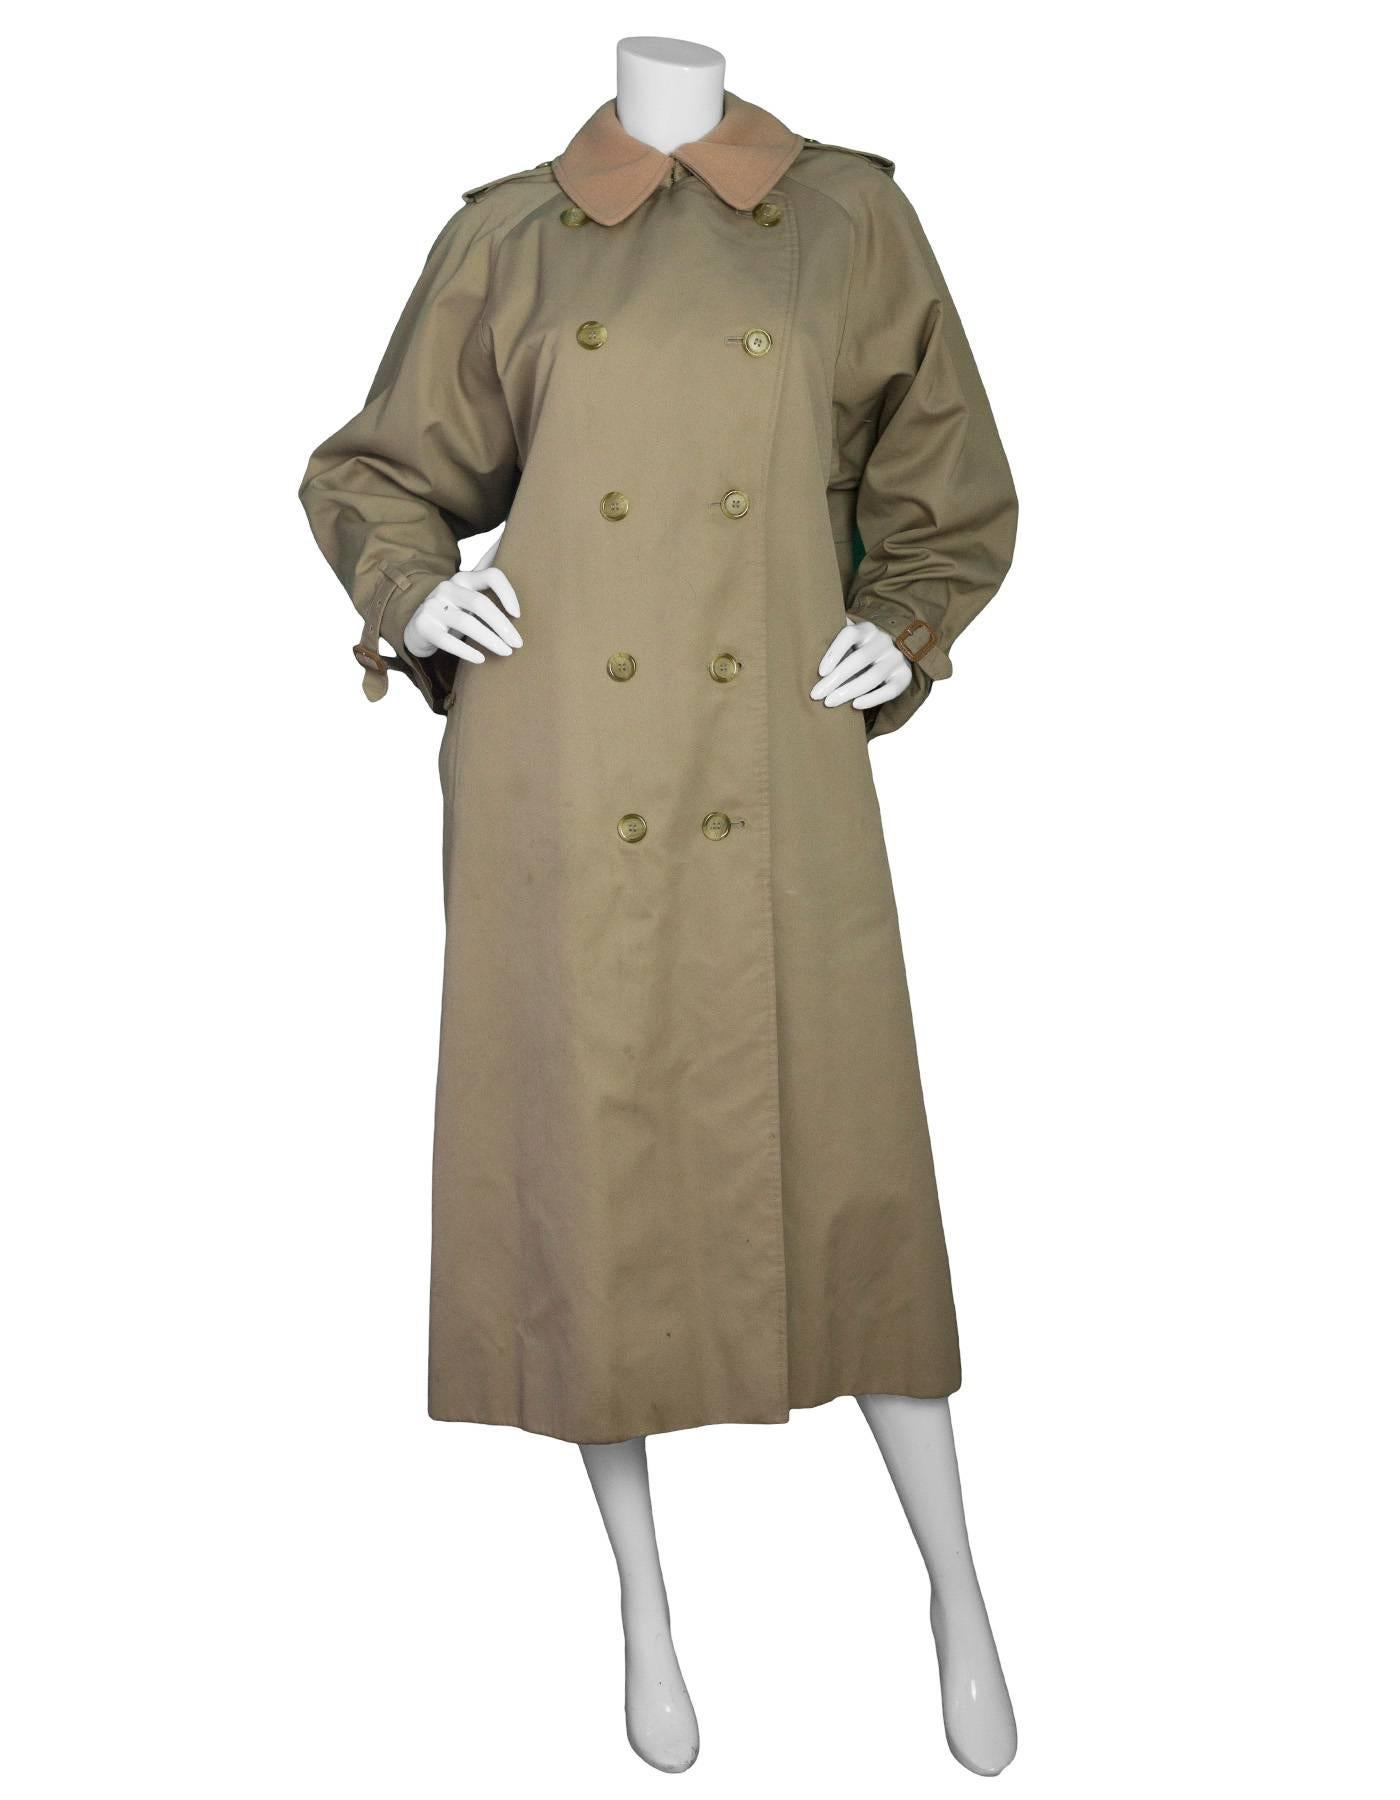 Burberry London Tan Trench Coat 
Features detachable zip around wool lining and collar

Color: Tan
Lining: 100% wool
Closure/Opening: Button down front
Exterior Pockets: Two hip pockets
Interior Pockets: None
Overall Condition: Very good pre-owned